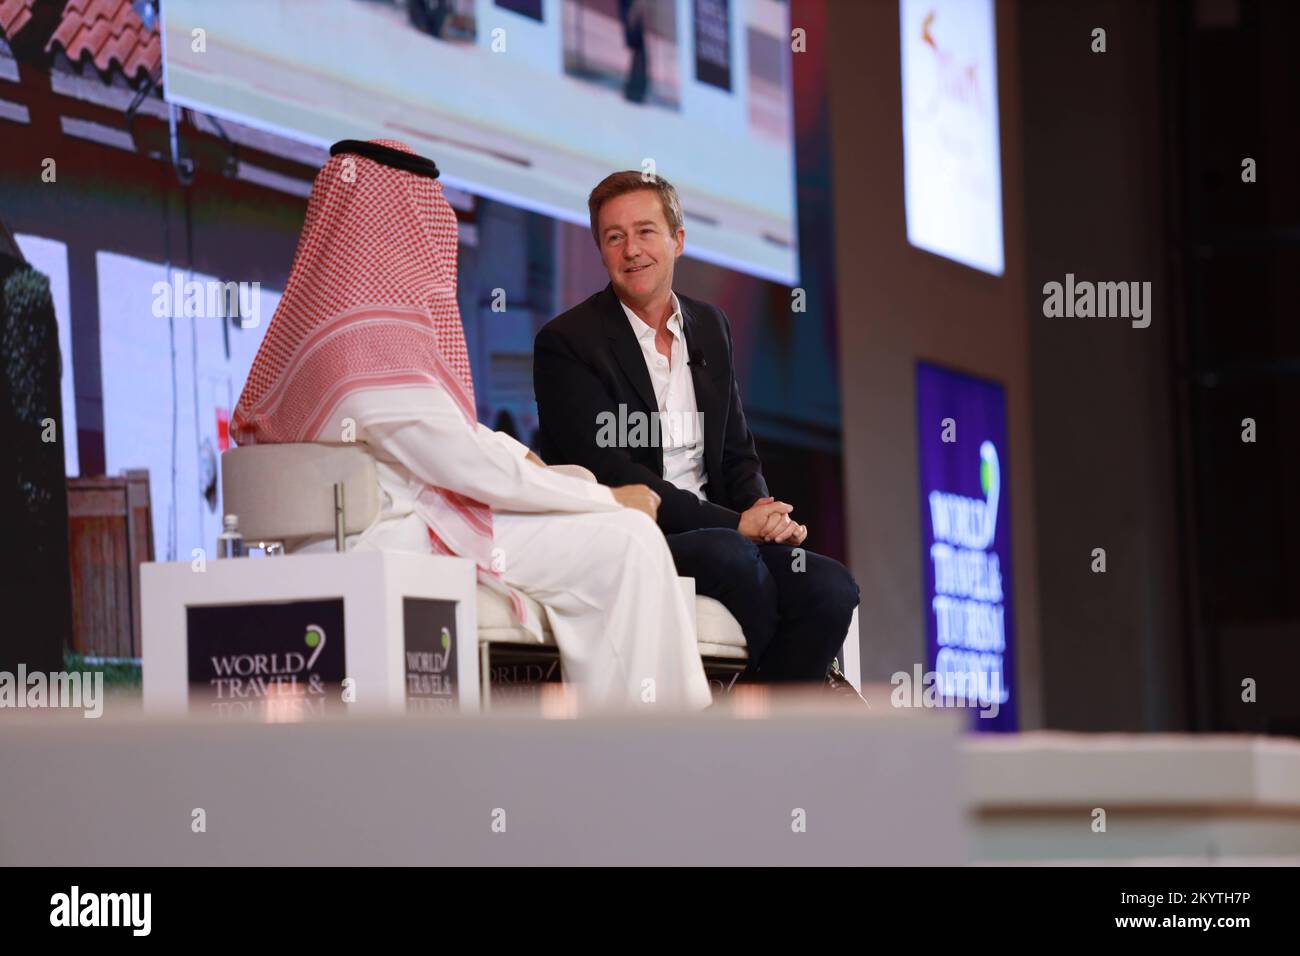 Riyadh, Saudi Arabia. 01st Dec, 2022. EDWARD NORTON at World Tourism Summit held in Riyadh. Host of the World Travel and Tourism Council (WTTC) World Summit, Saudi Arabia has pulled off the biggest event in its history, breaking all records and drawing more international business leaders and foreign government delegations than ever before. 2,500 participants traveled to Riyadh to attend the “Travel for a better future” summit. Friday December 2, 2022 POOL/AVORY CELEBRITY ACCESS/Cordon Press Credit: CORDON PRESS/Alamy Live News Stock Photo